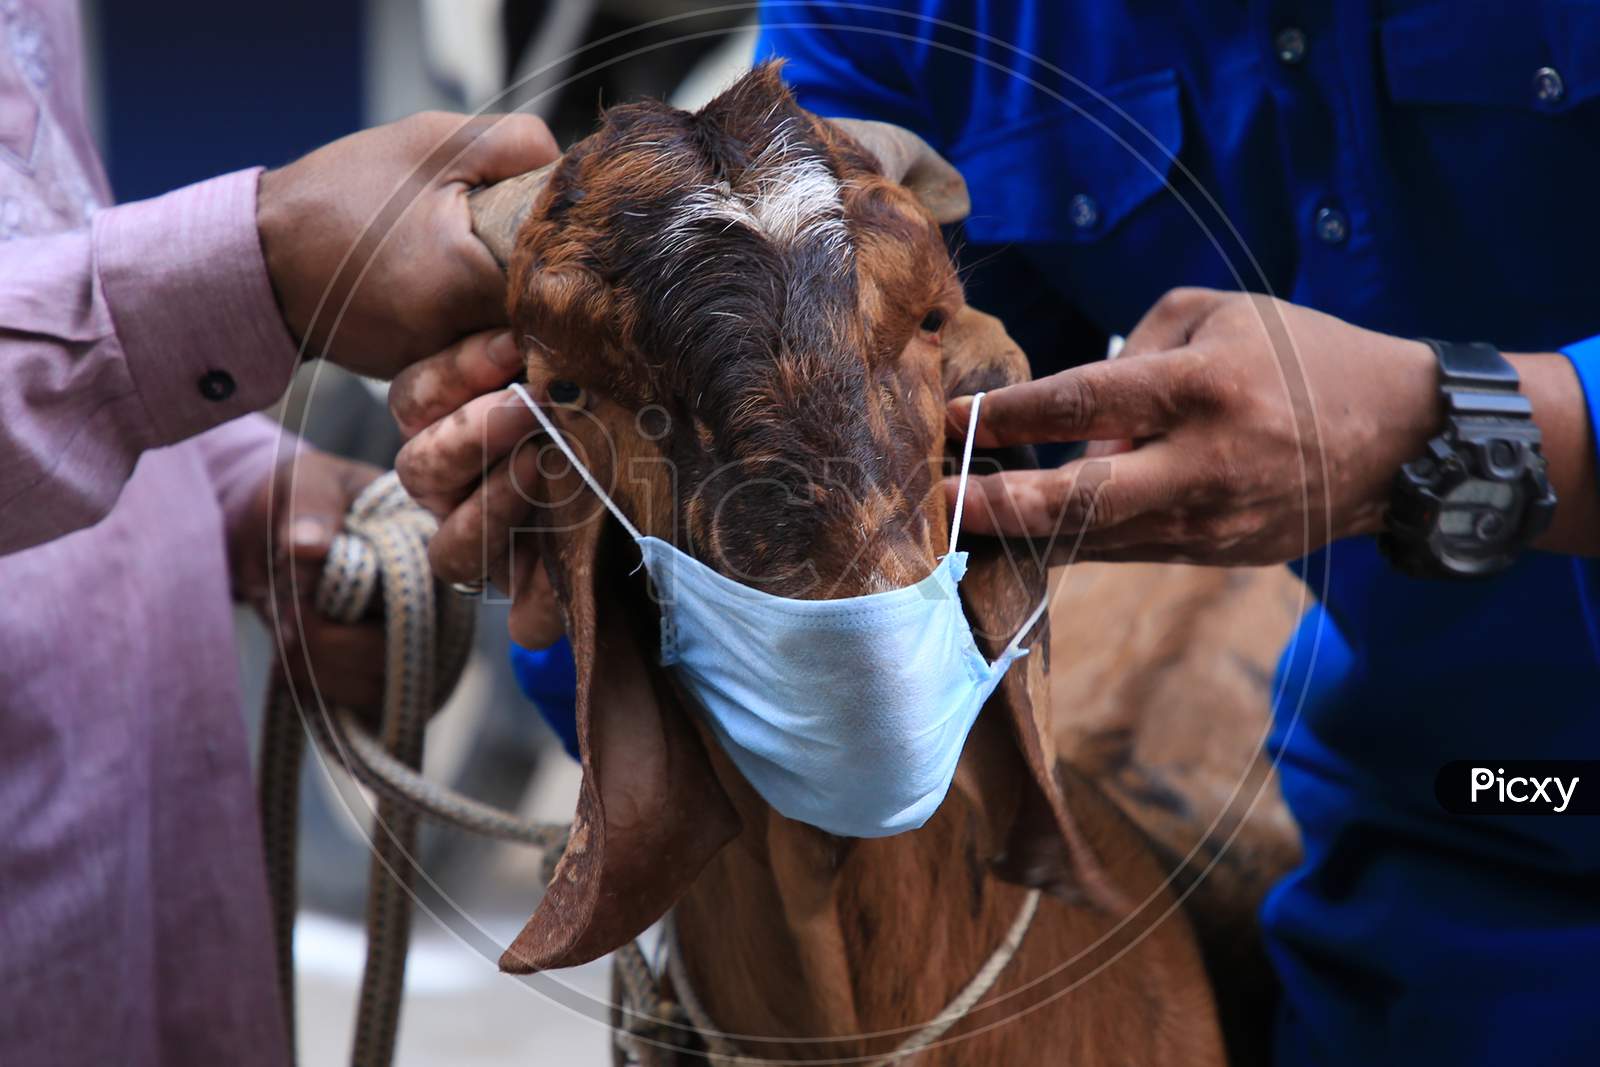 Men Hold A Face Mask Against The Face Of A Goat During  Eid Al-Adha, The Feast Of Sacrifice Outside The Shrine Of Sufi Saint Khwaja Moinuddin Chishti In Ajmer, On August 1, 2020.